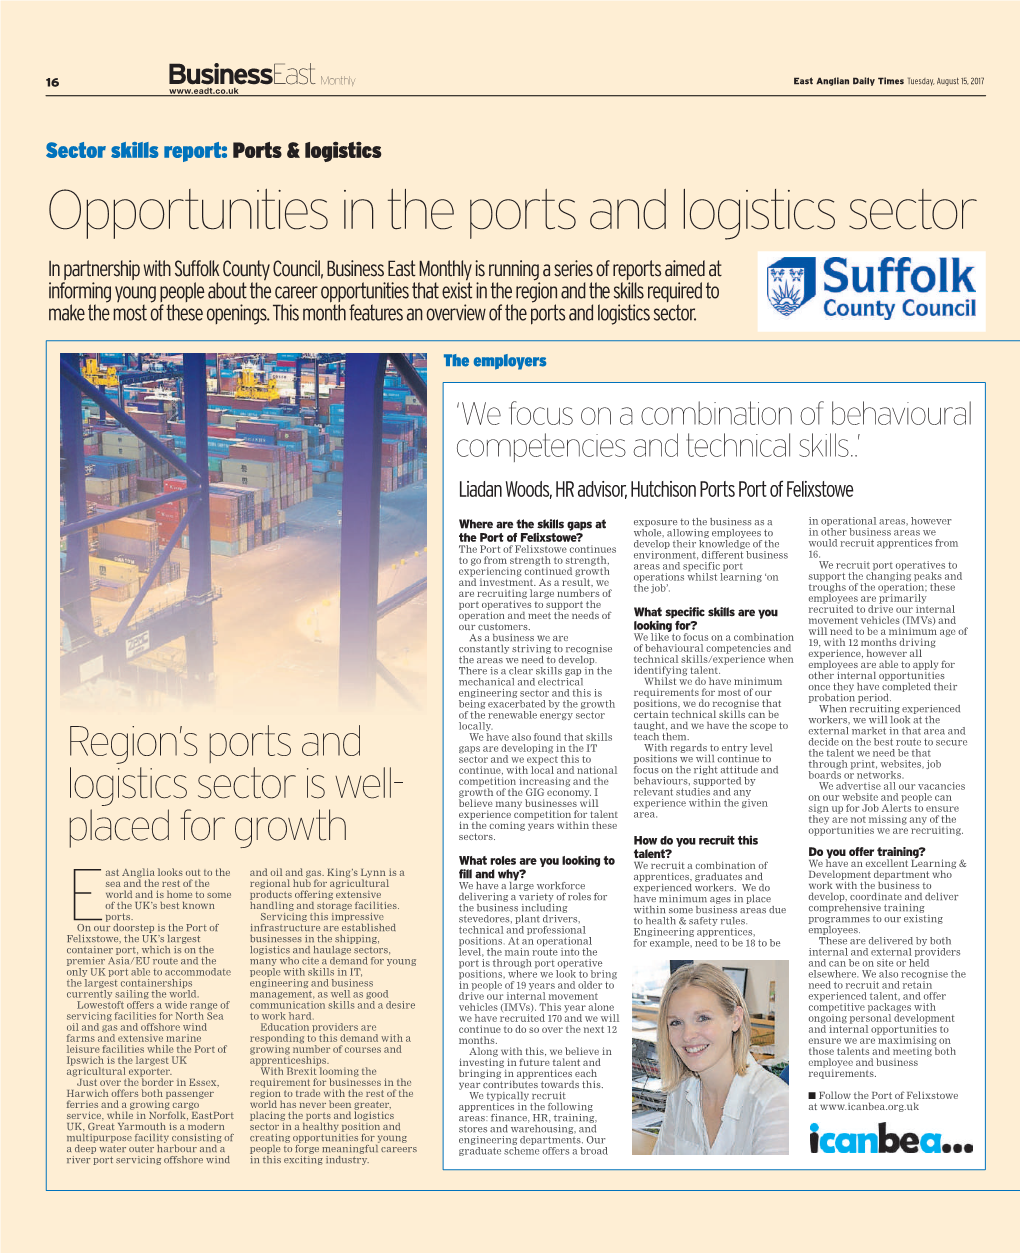 Opportunities in the Ports and Logistics Sector